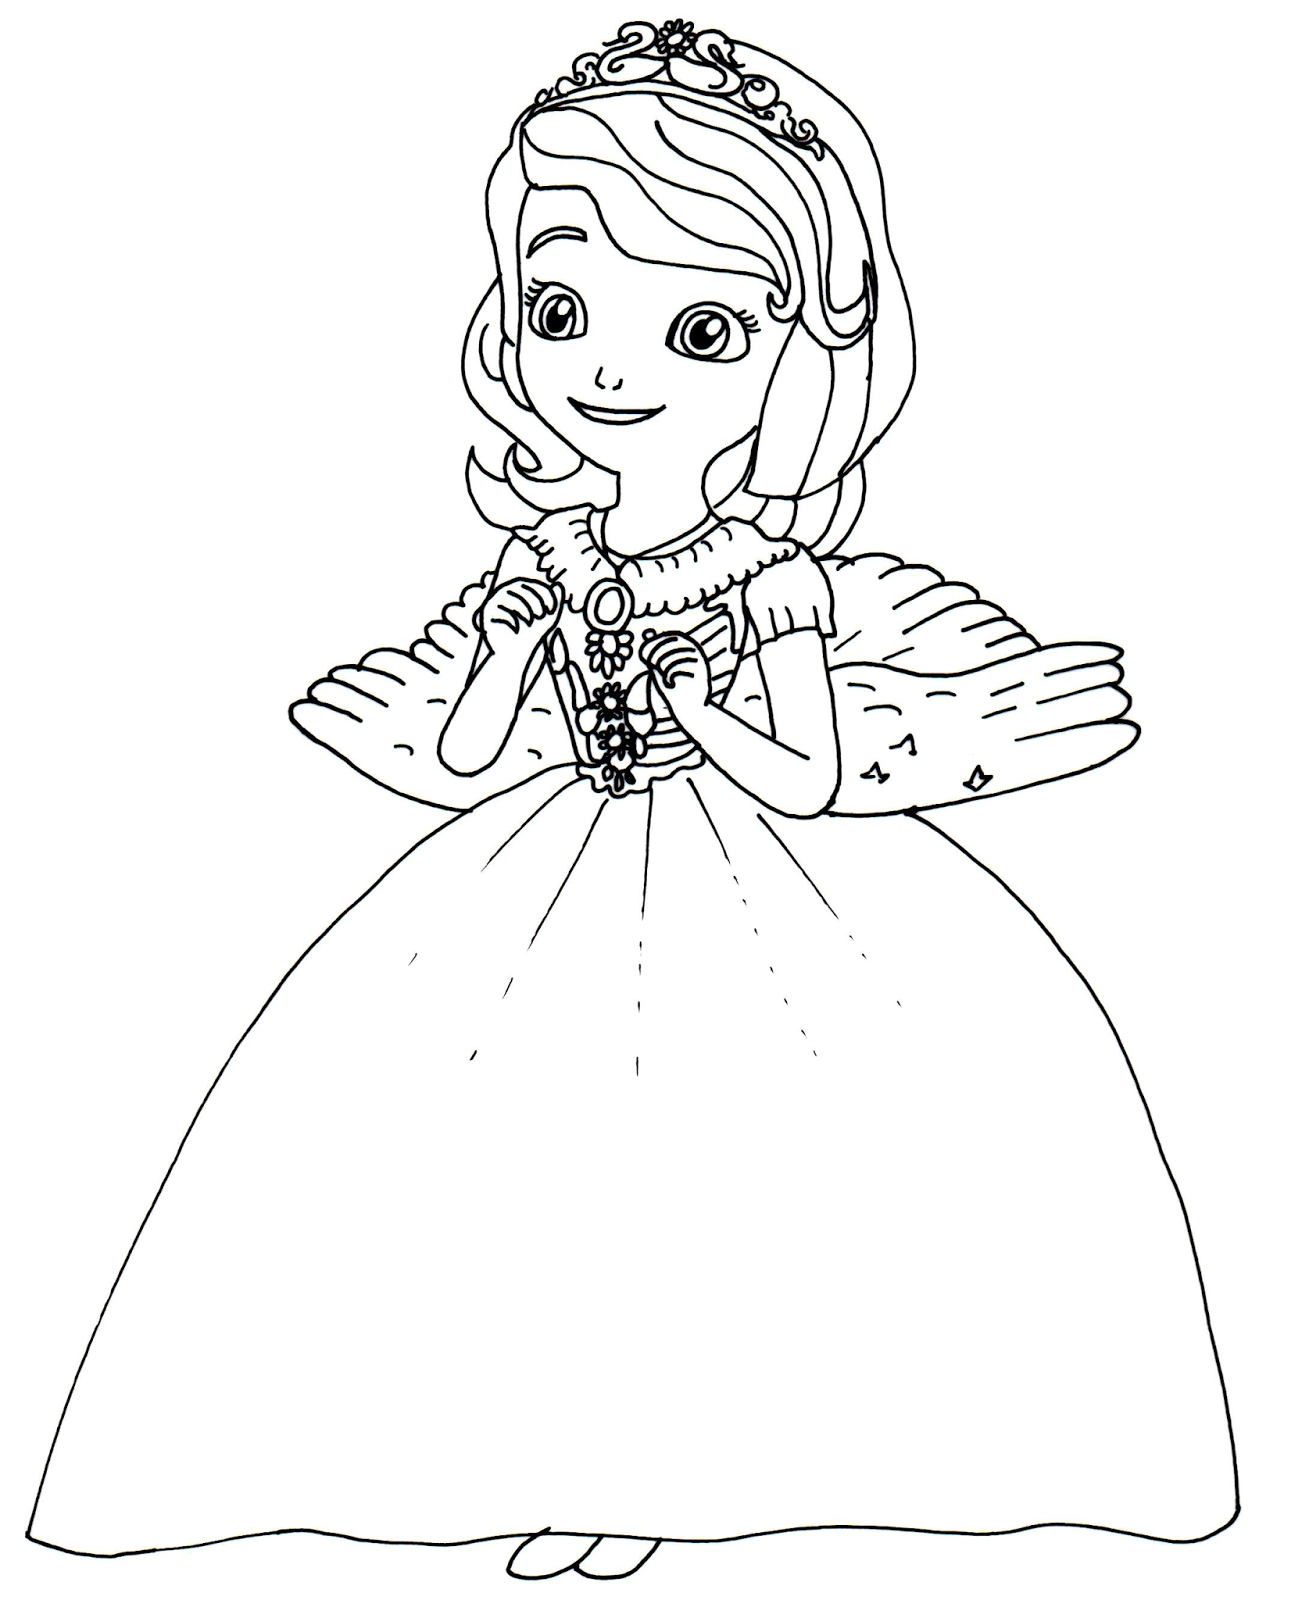 Sofia Coloring Pages at GetColorings.com | Free printable colorings